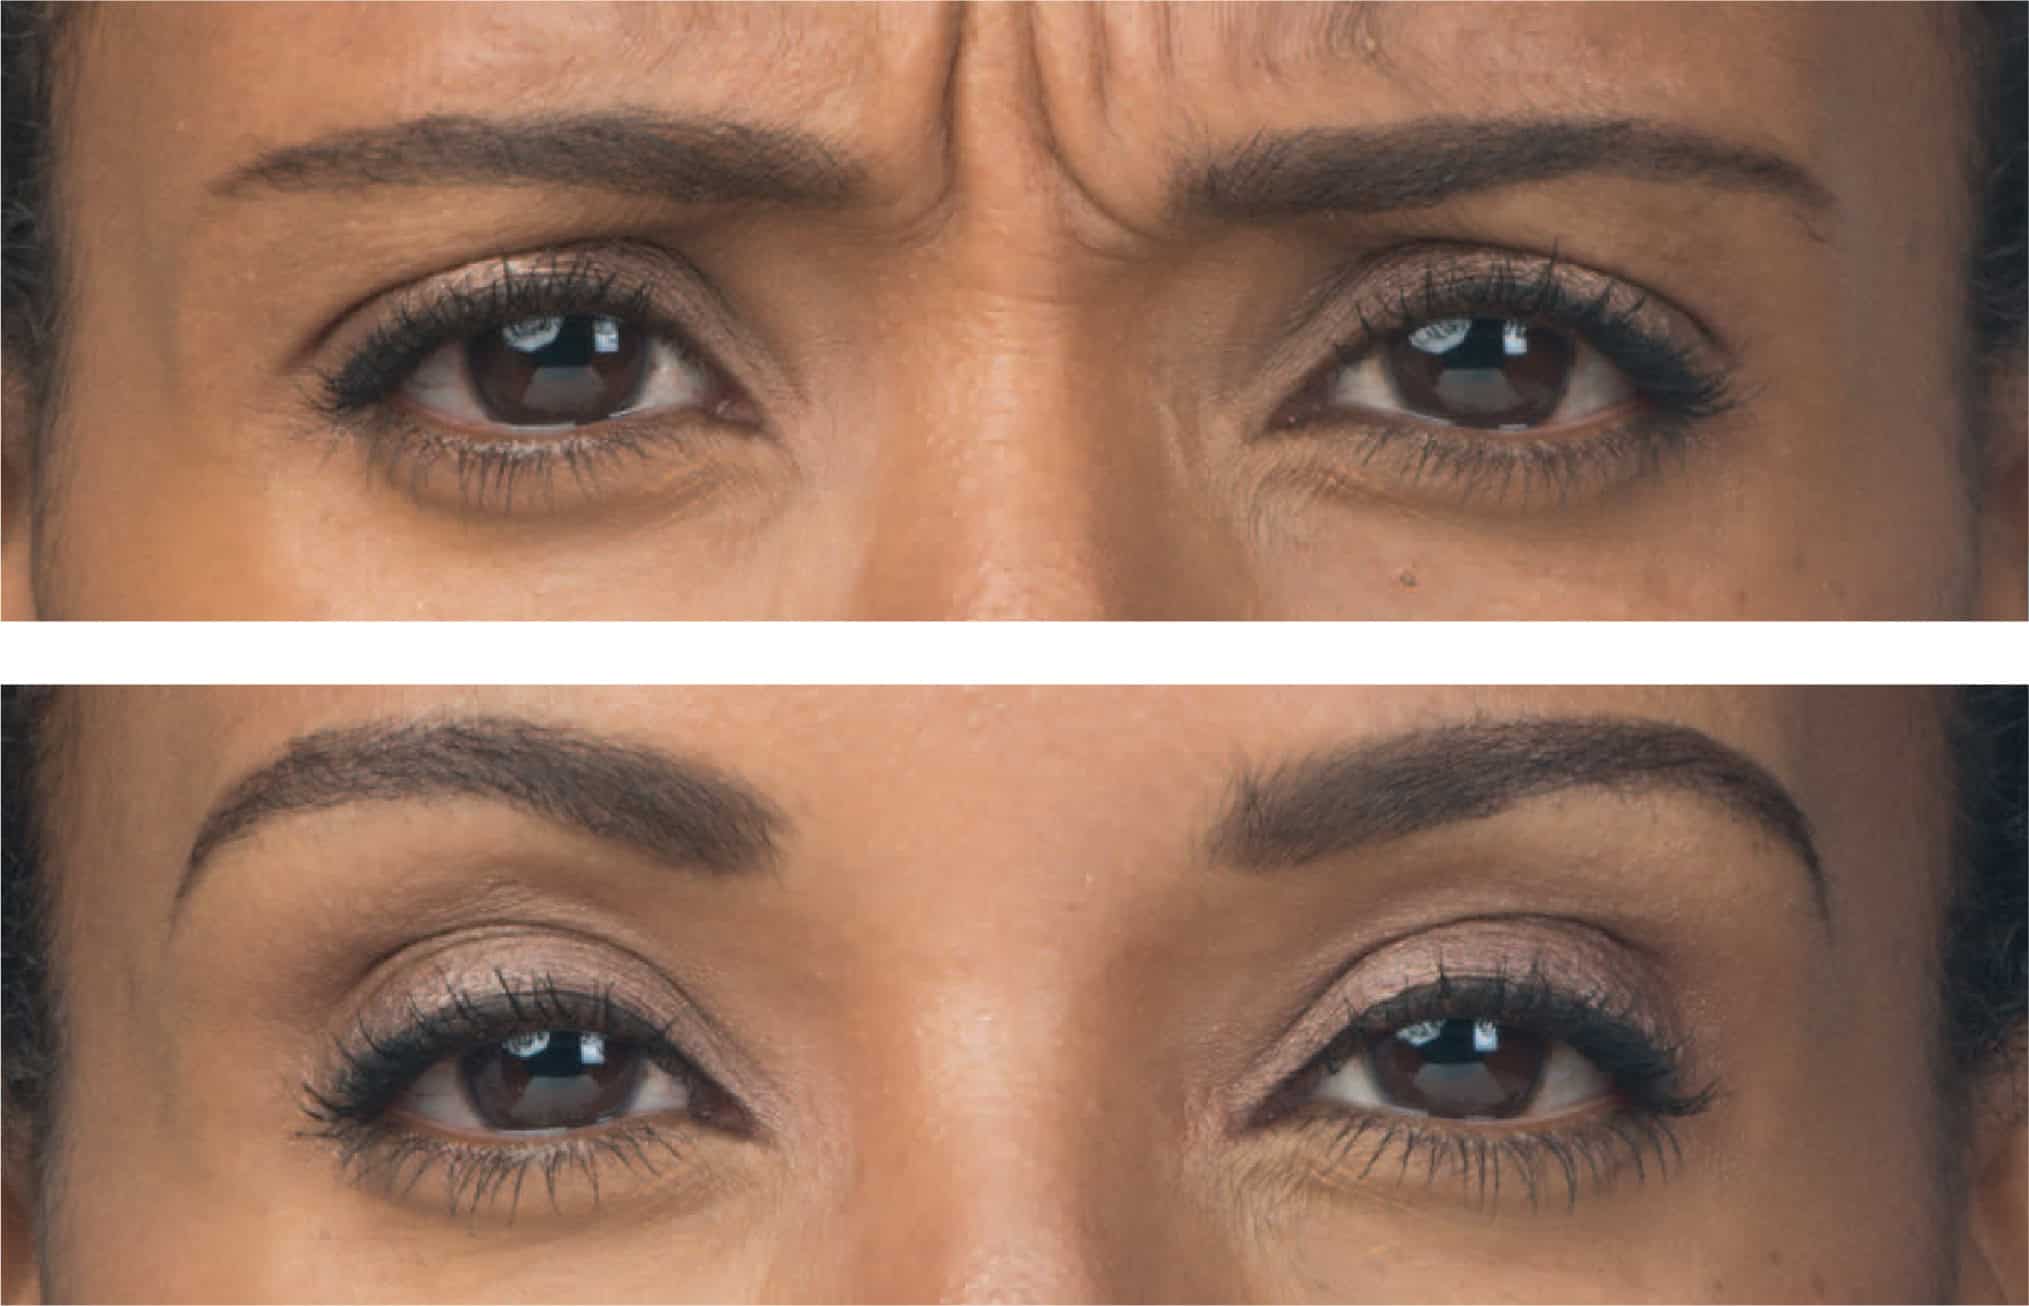 Two close-up images of a woman's face to show how botox relaxes wrinkles